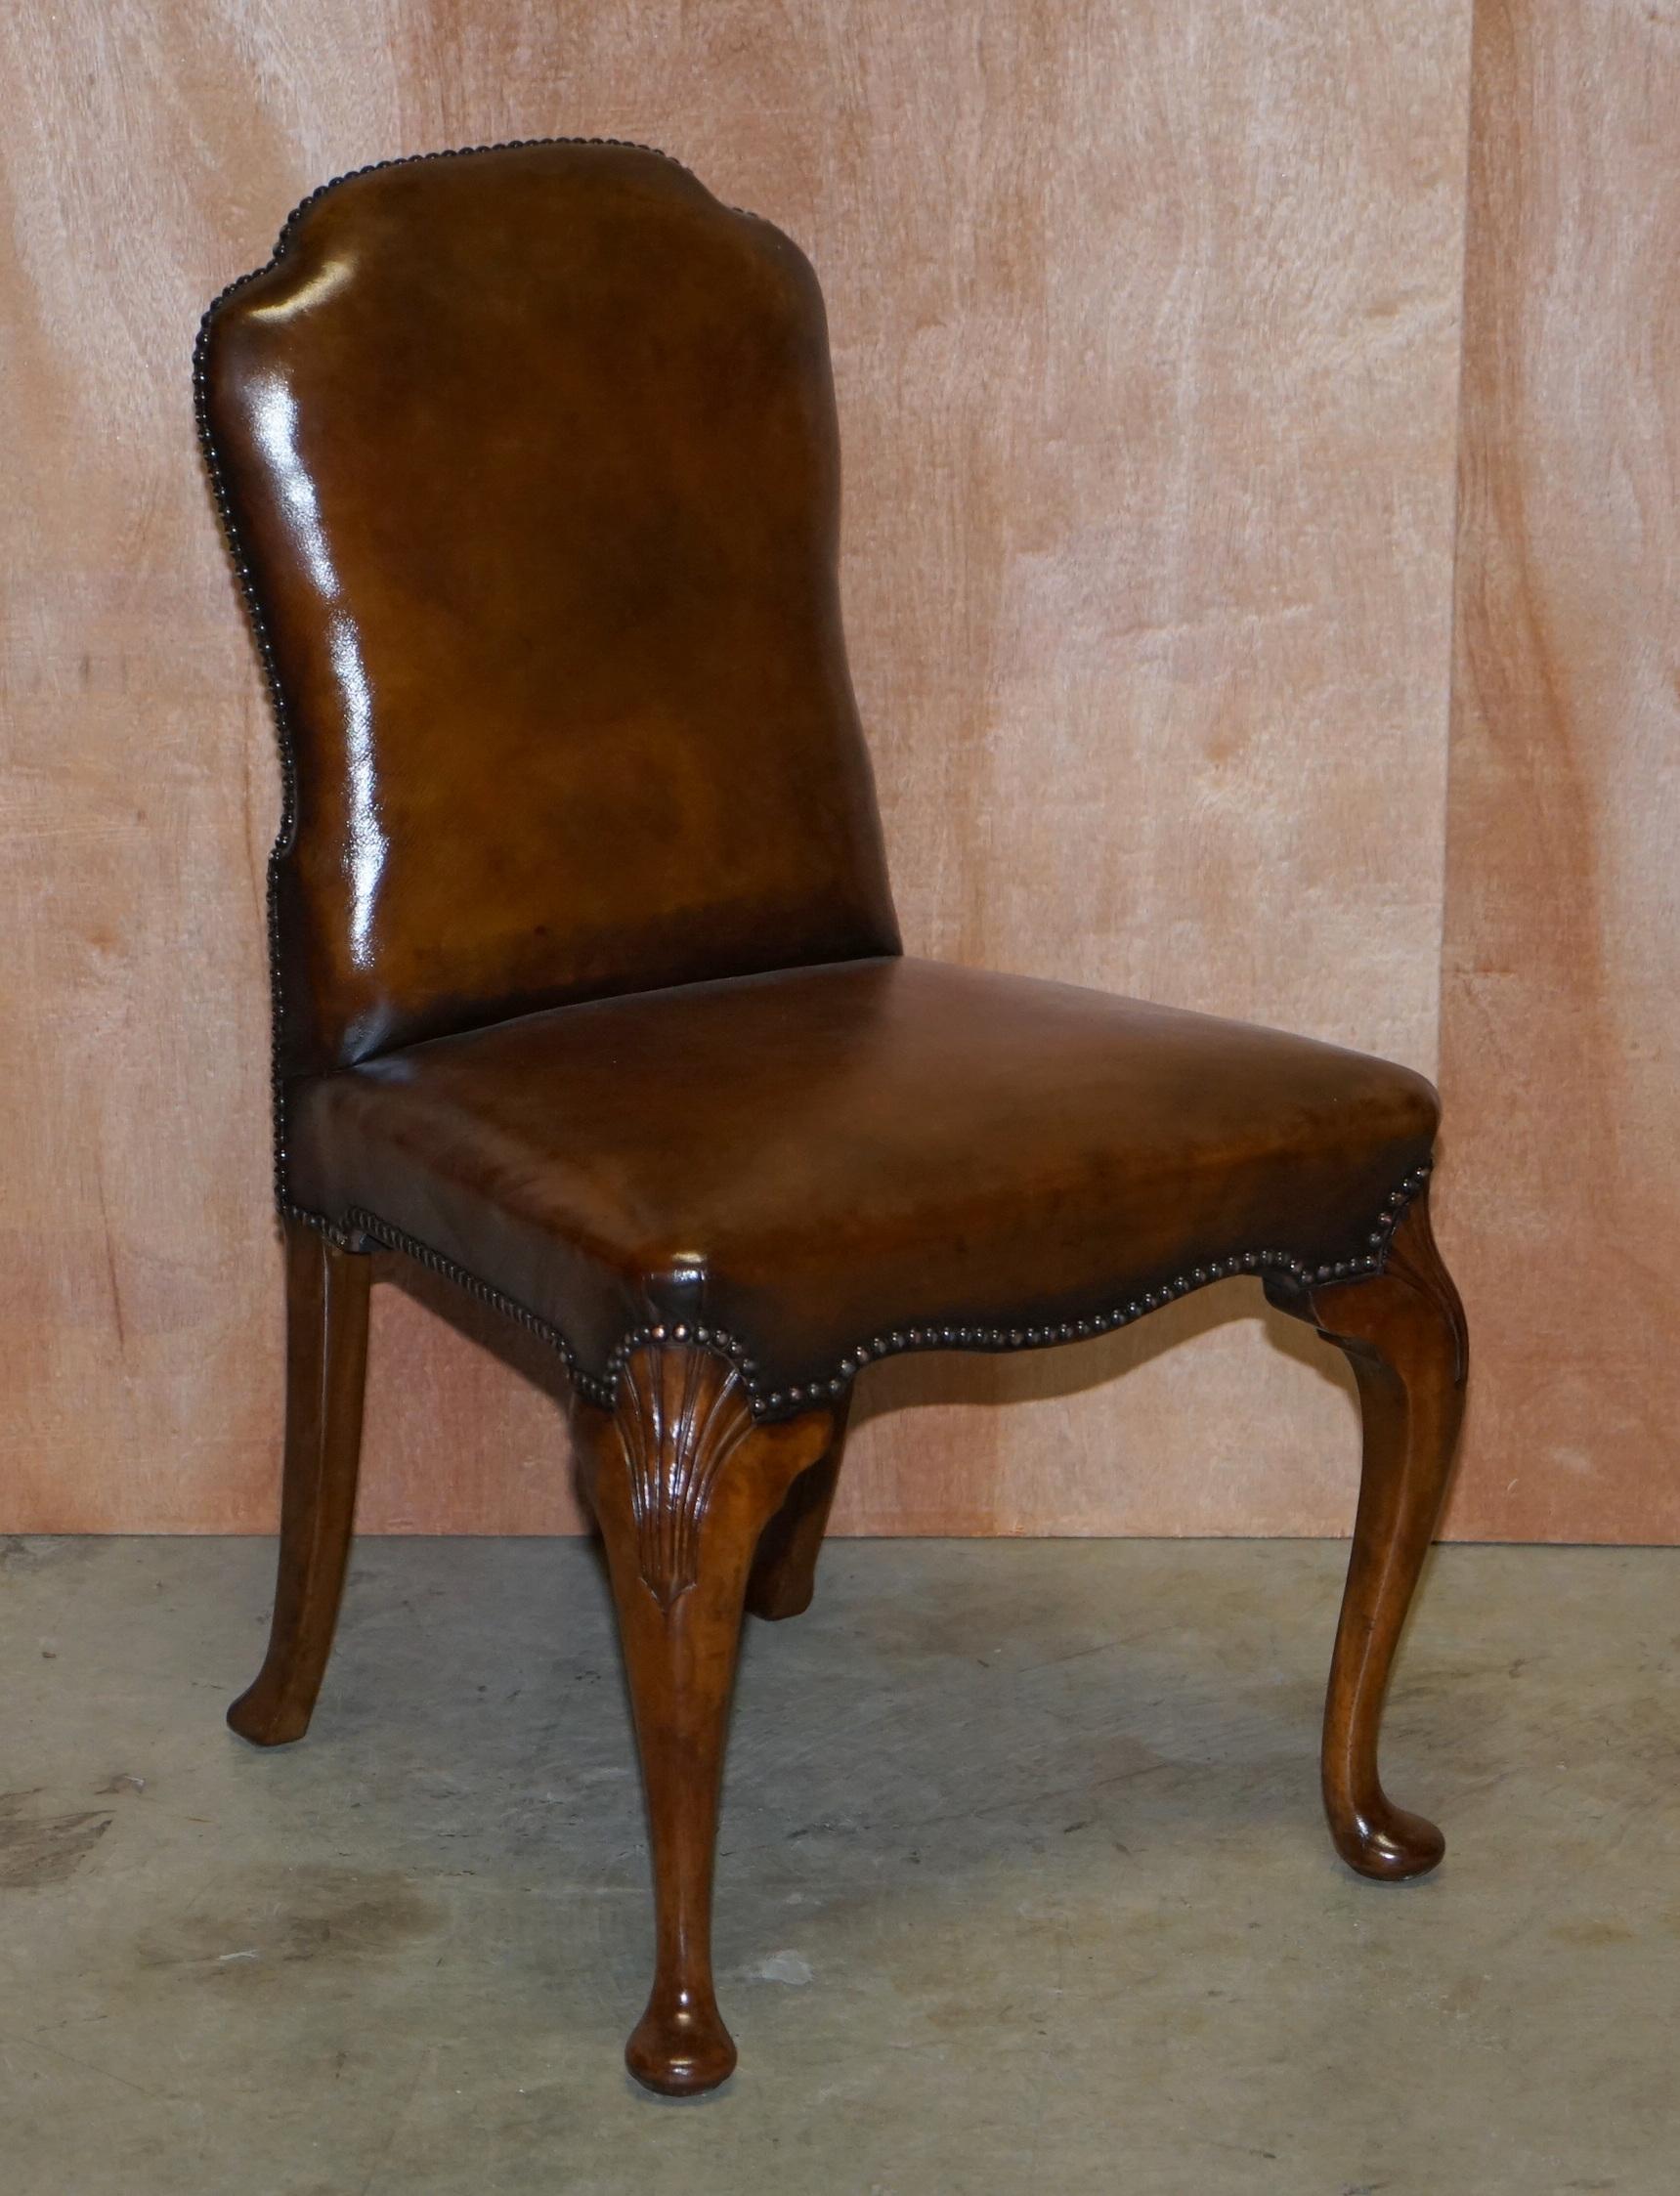 High Victorian 10 Victorian 1880 Walnut Shepherds Crook Hand Dyed Brown Leather Dining Chairs